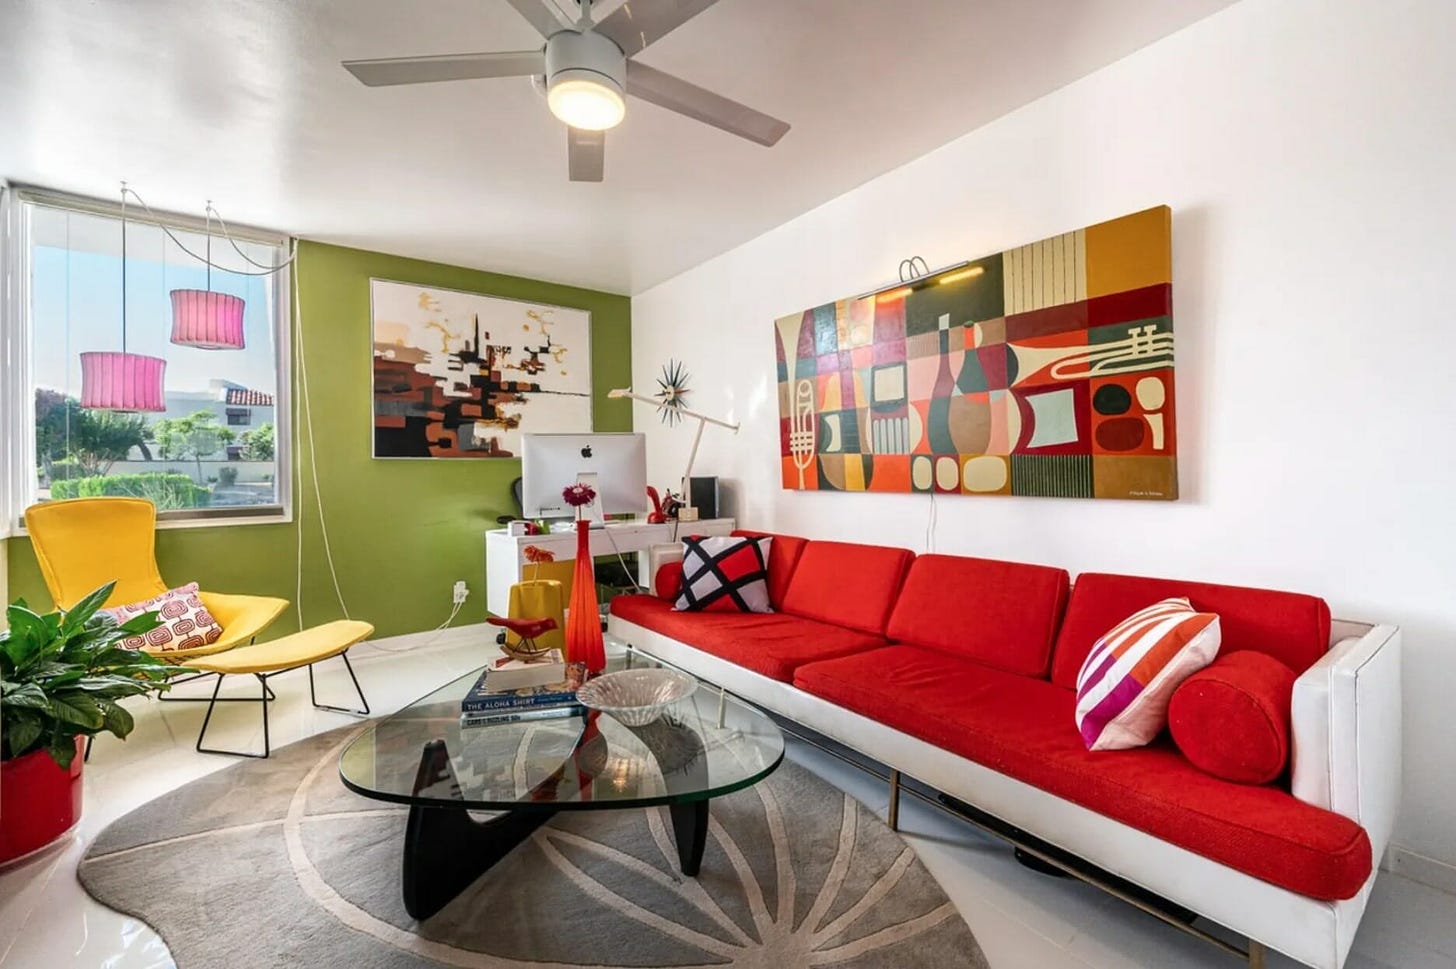 Before & After: Colorful Eclectic Living Room and Bedroom - Decorilla  Online Interior Design